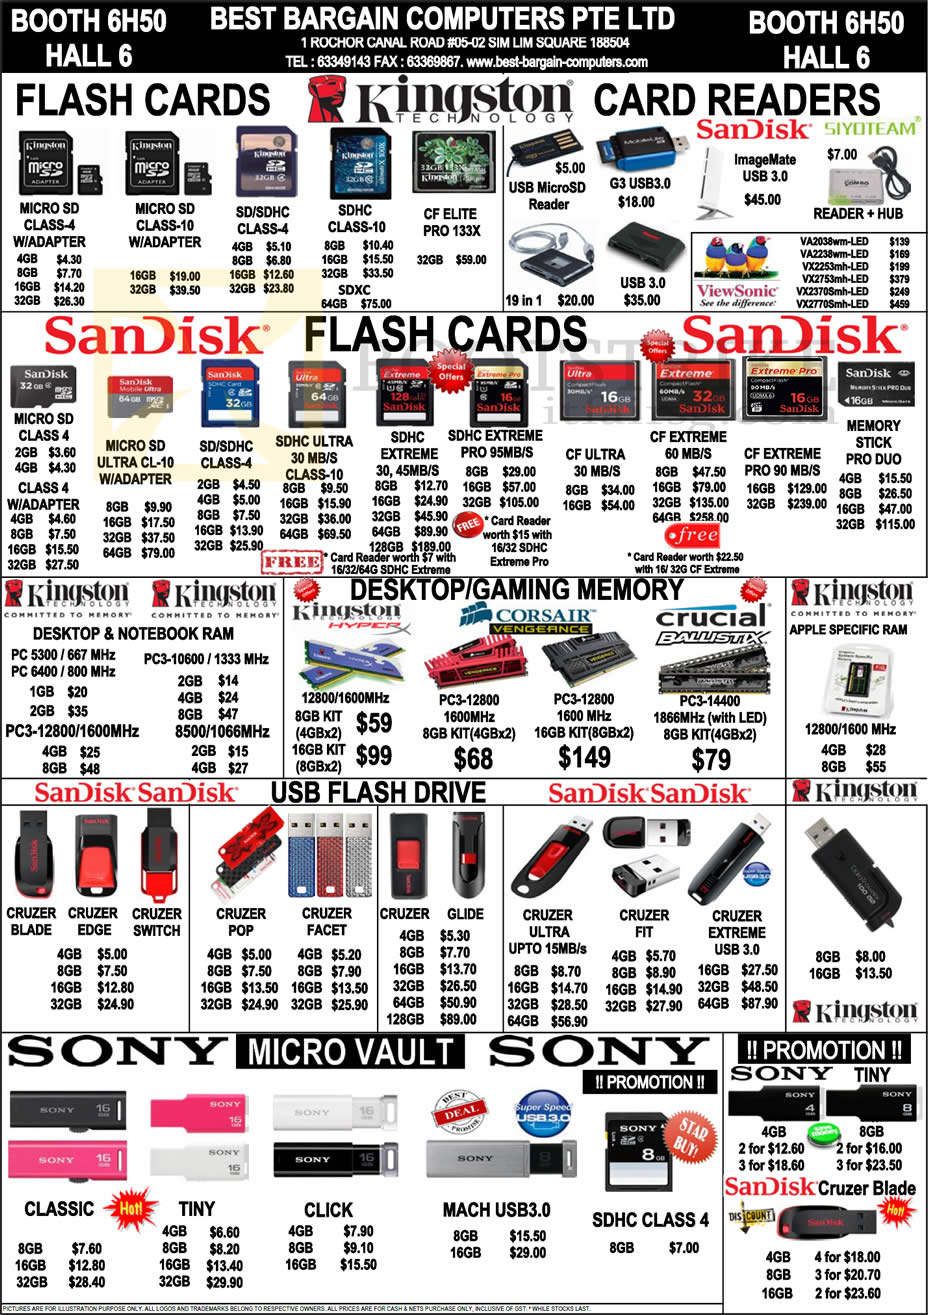 SITEX 2012 price list image brochure of Best Bargain Flash Memory Cards MicroSD, Card Readers, SDHC, Compact Flash CF, RAM DDR3 Apple, USB Cruzer Blade Edge Switch Extreme, Sony Tiny Micro Vault